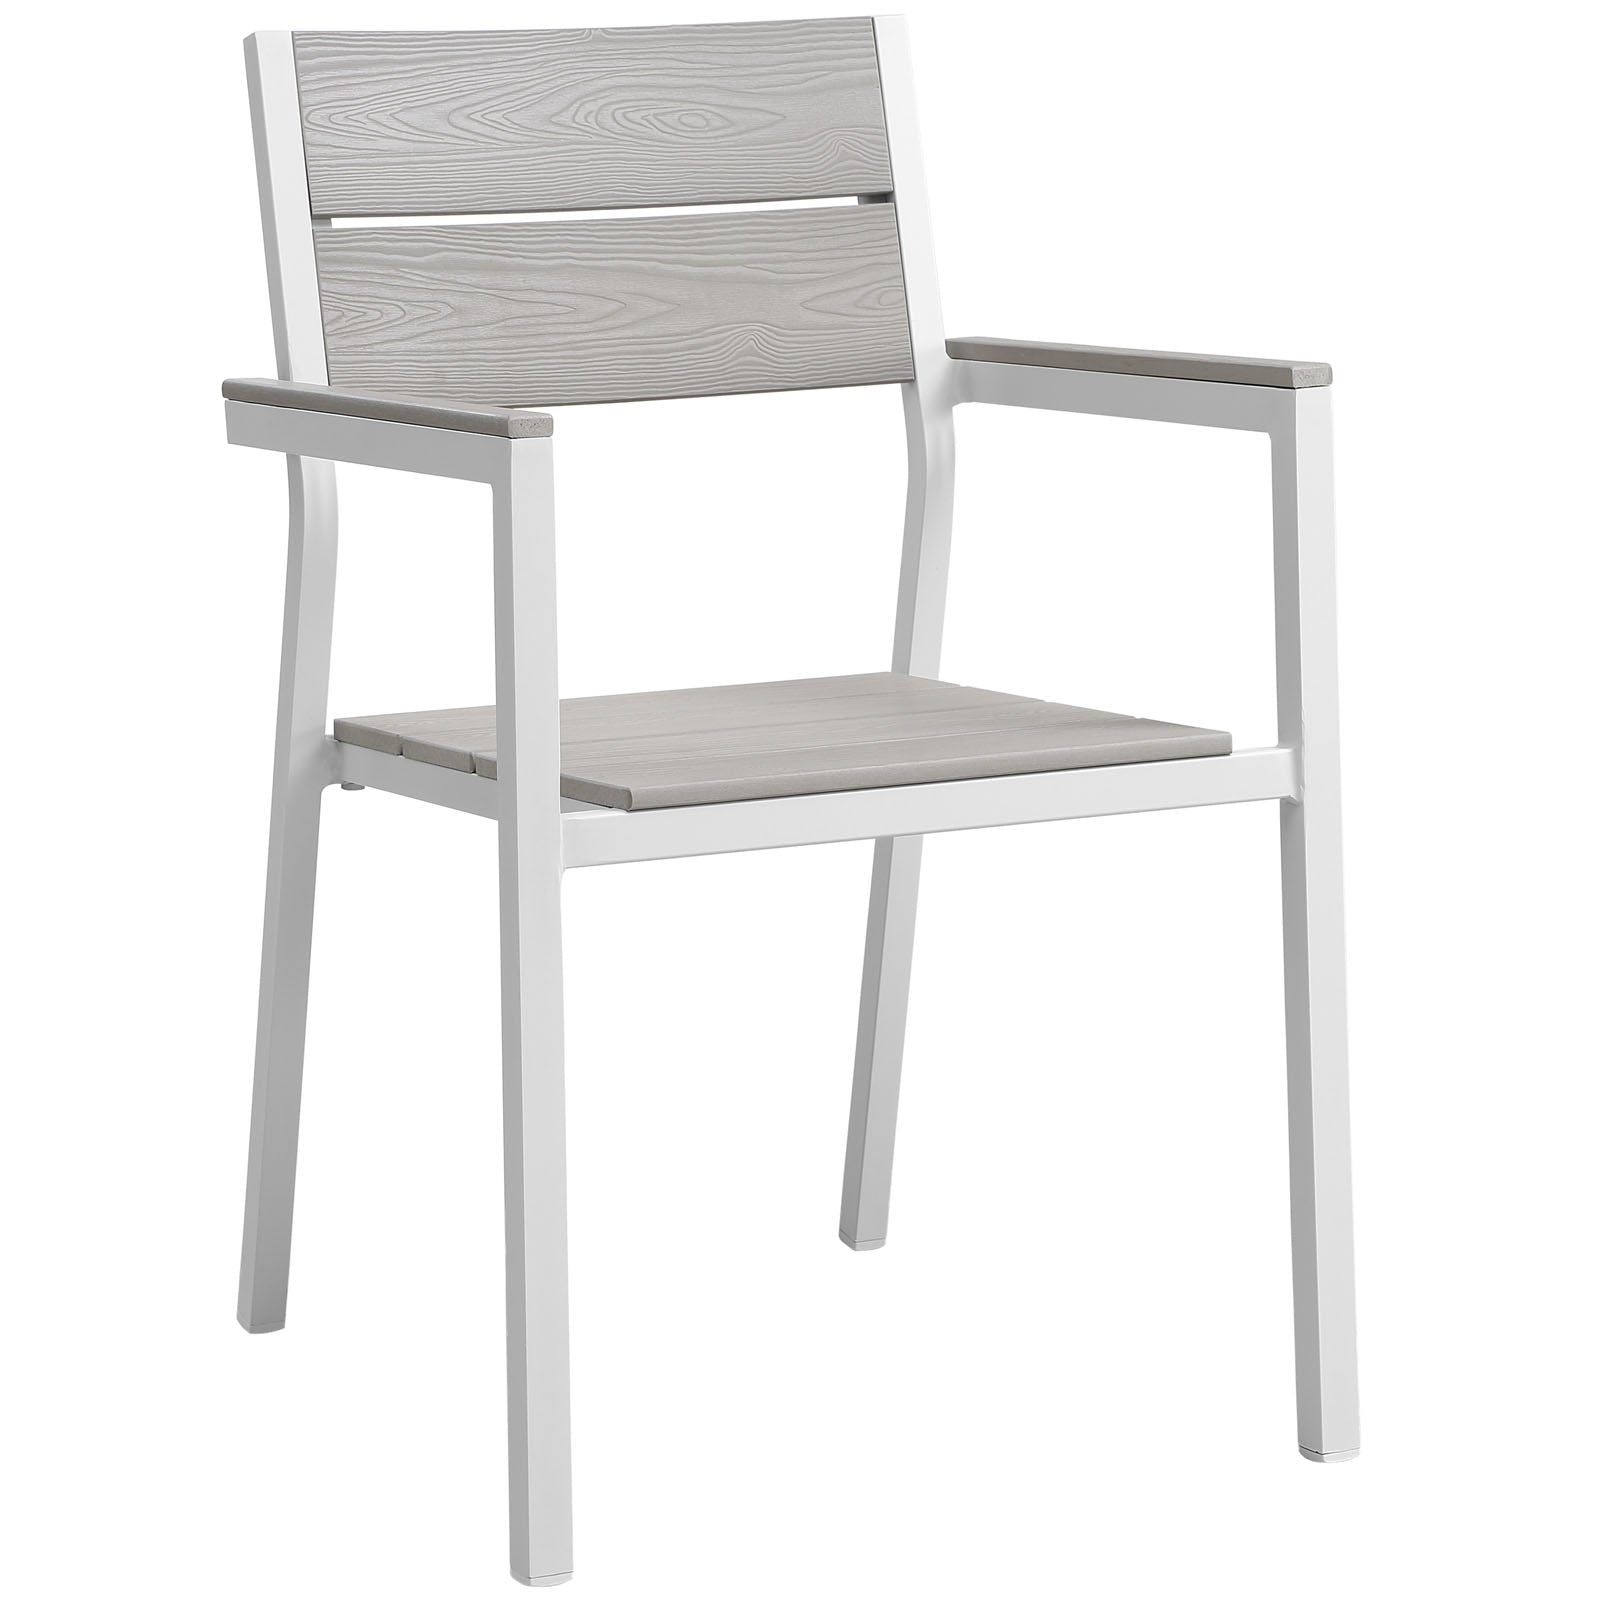 Modway Outdoor Dining Chairs - Maine Outdoor Dining Armchair White & Light Gray (Set of 2)